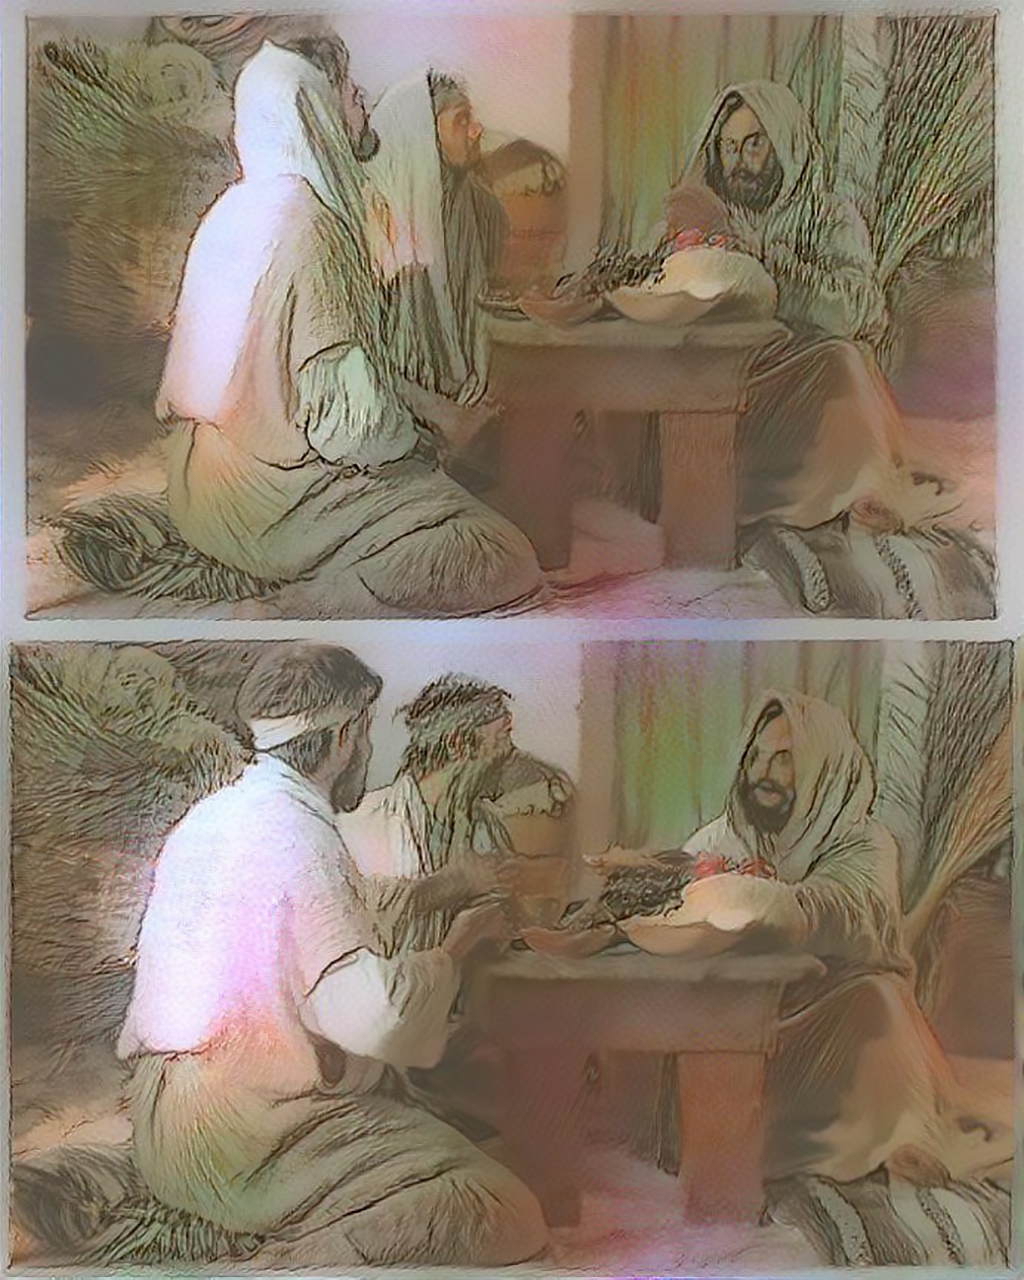 Then Jesus took the bread and broke it with benedictions, after which he offered it to the two.